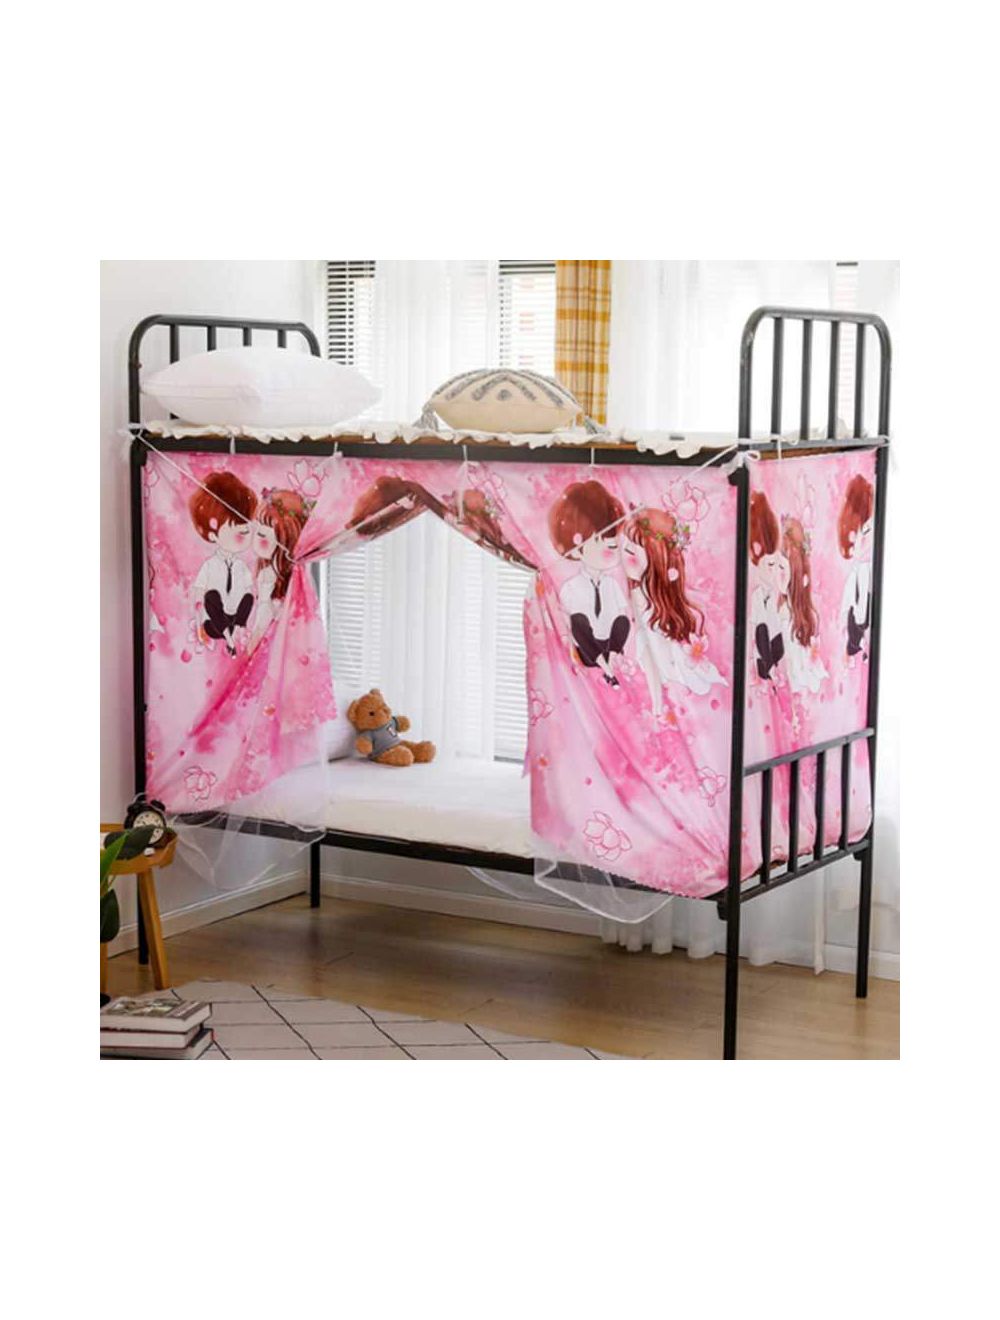 Deals for Less -Bed curtain for lower deck single bed, Cute couple design pink color-BC43-04